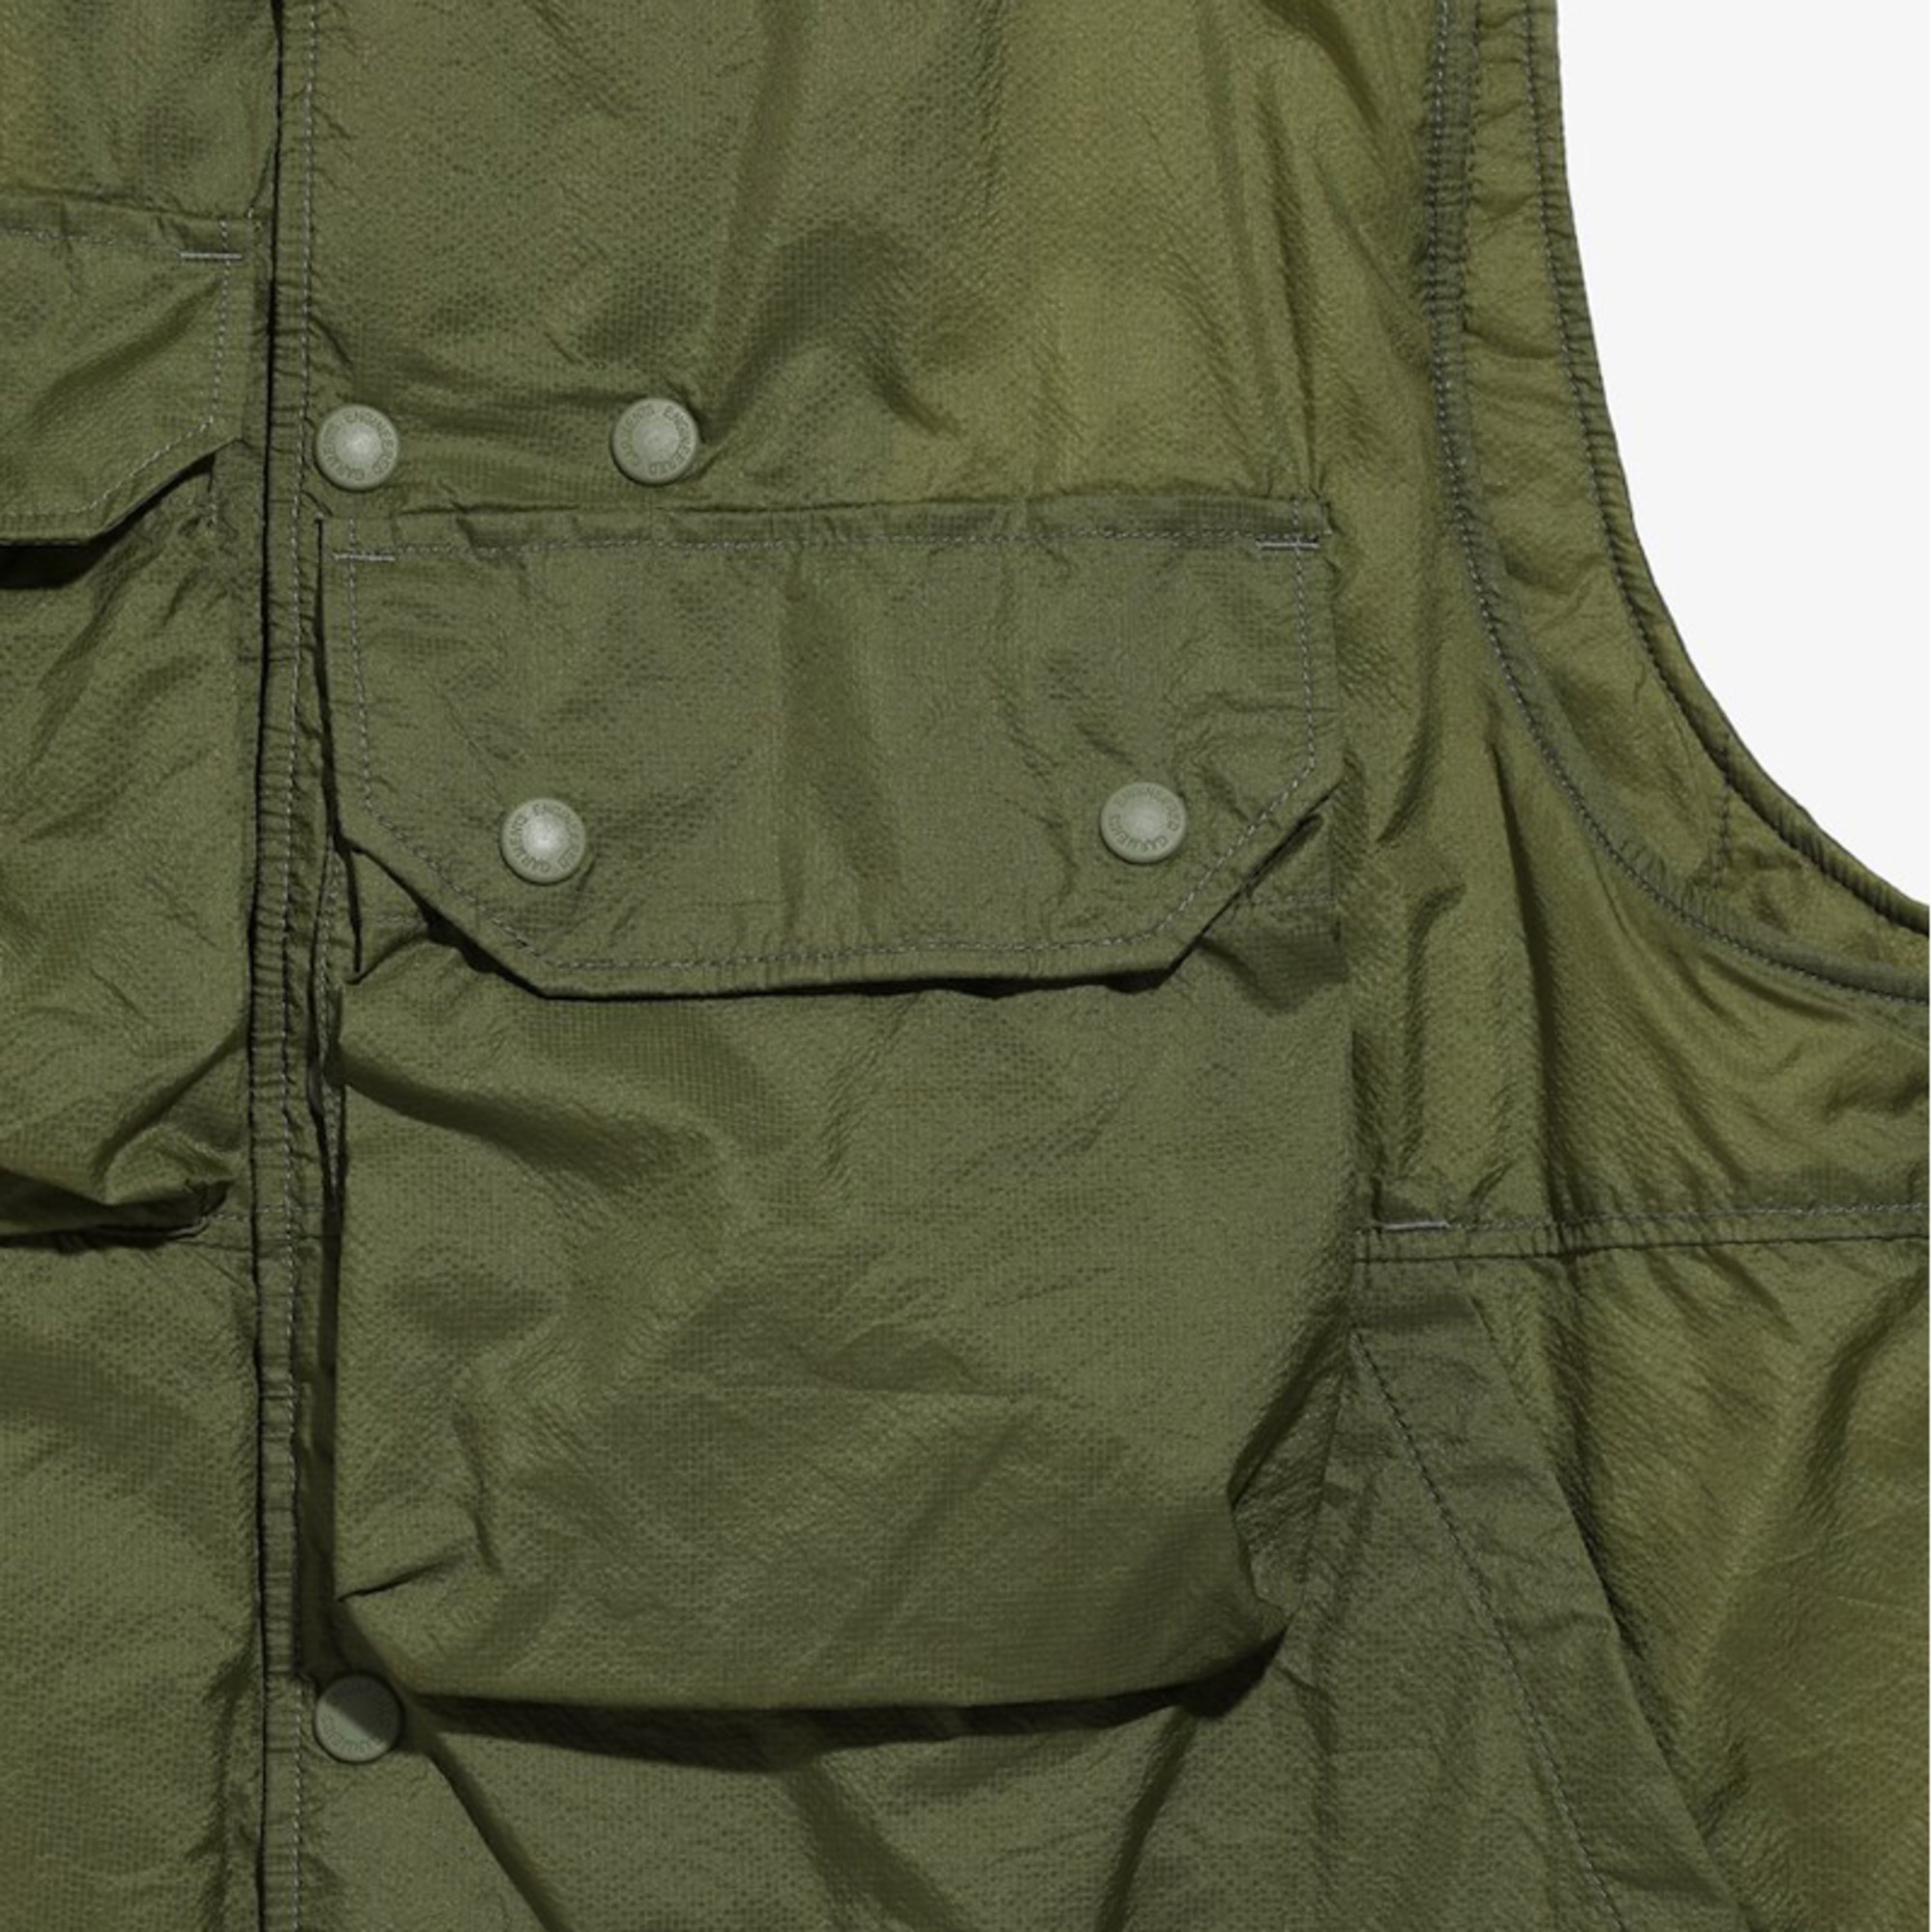 ENGINEERED GARMENTS 21AW COVER VEST - NYLON MICRO RIPSTOP